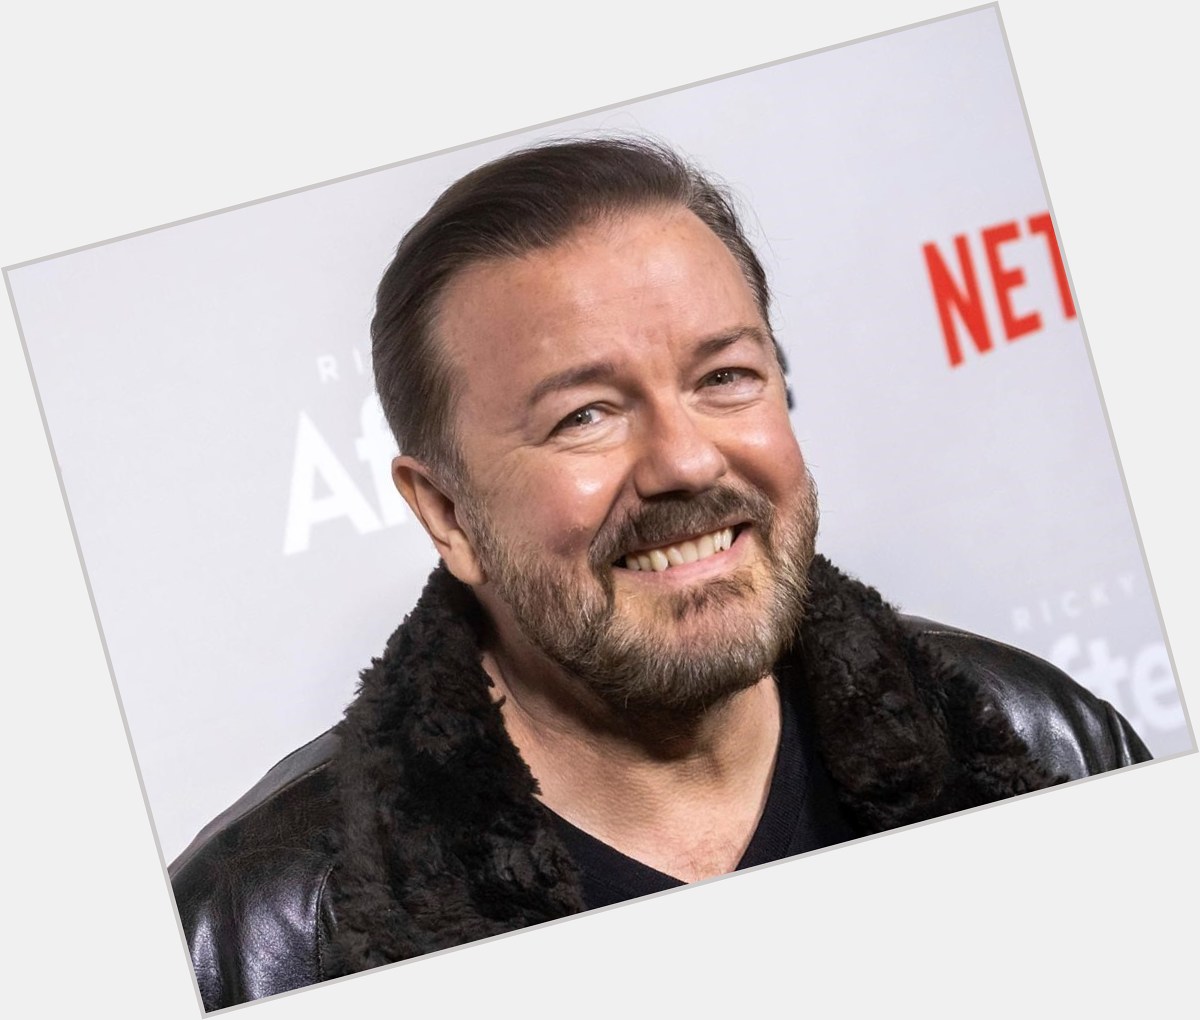 Happy birthday to Ricky Gervais, who turns 59 today! 